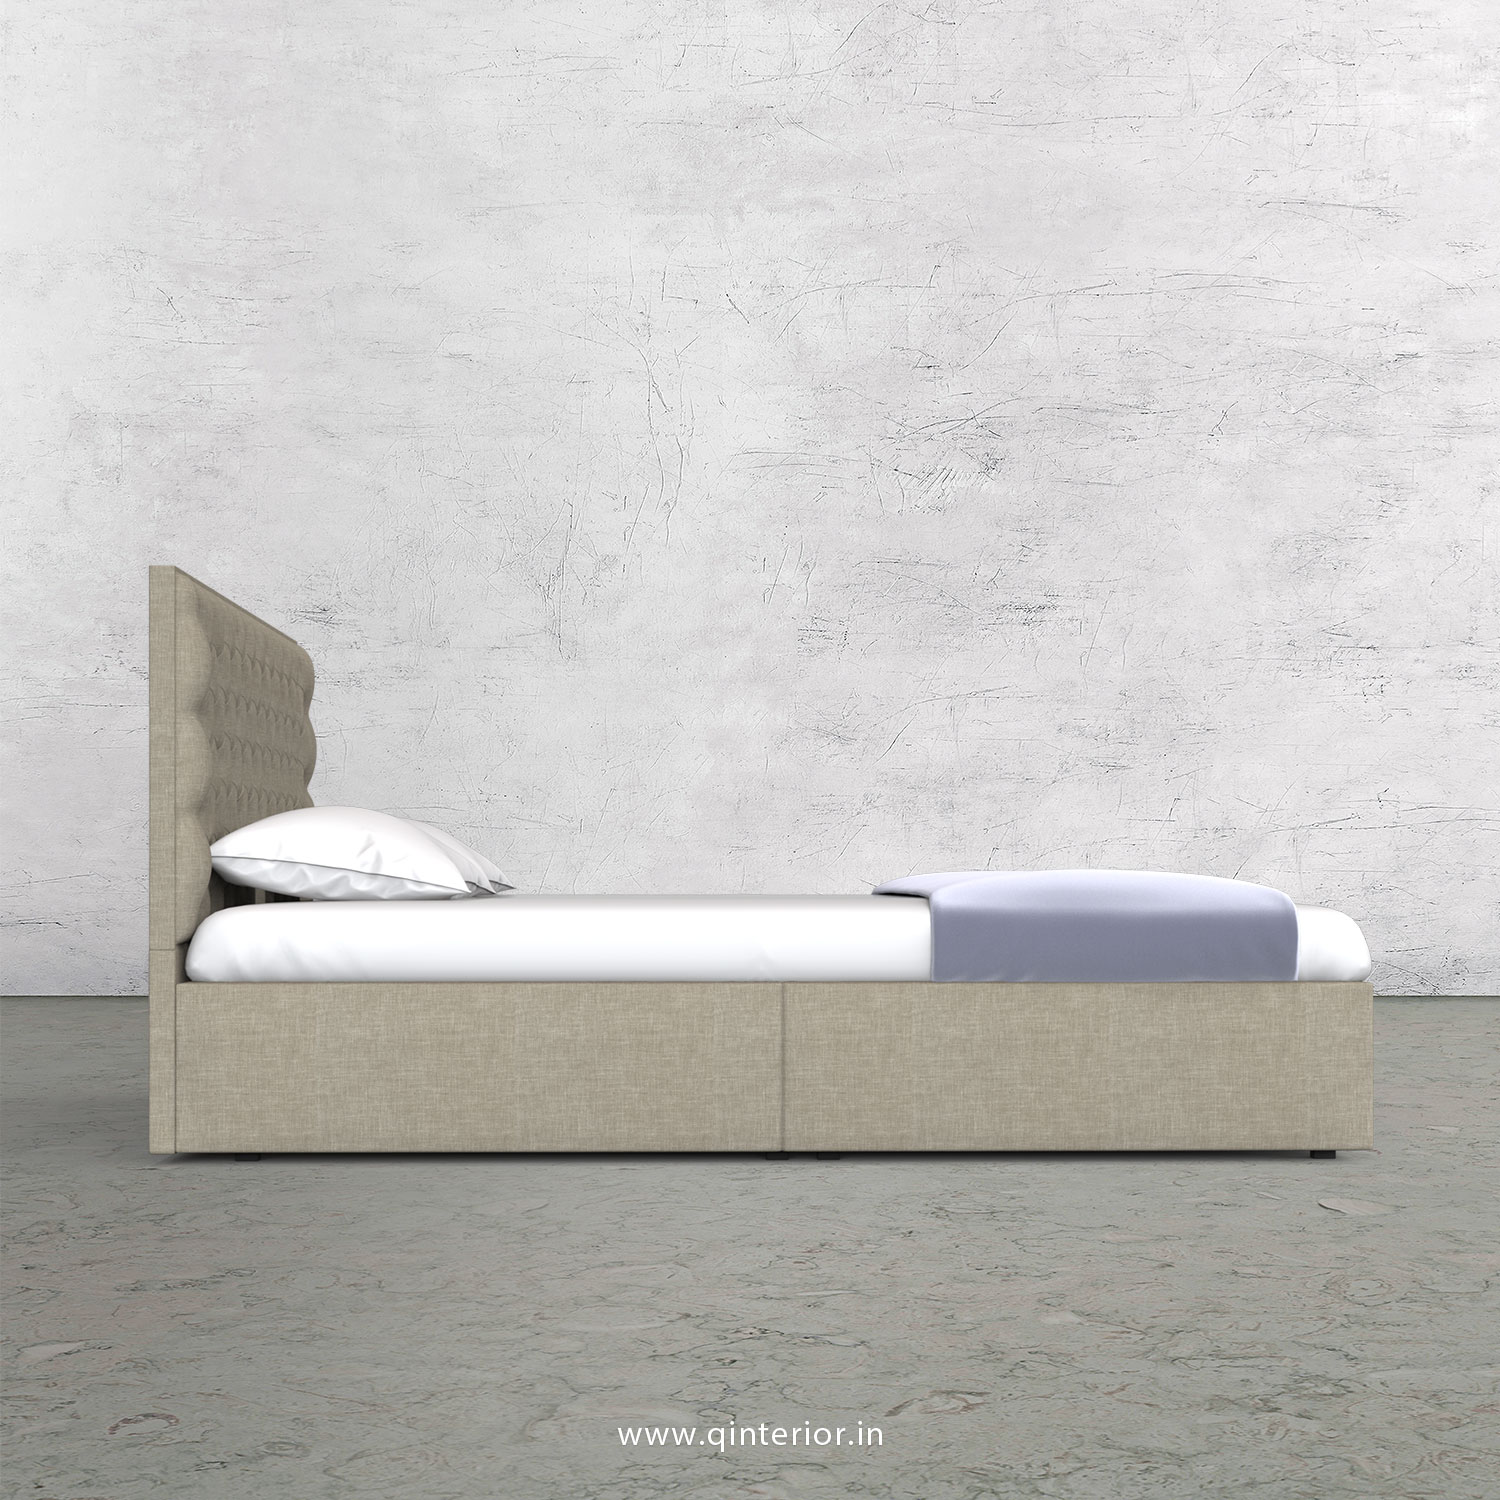 Orion King Size Storage Bed in Cotton Plain - KBD001 CP01